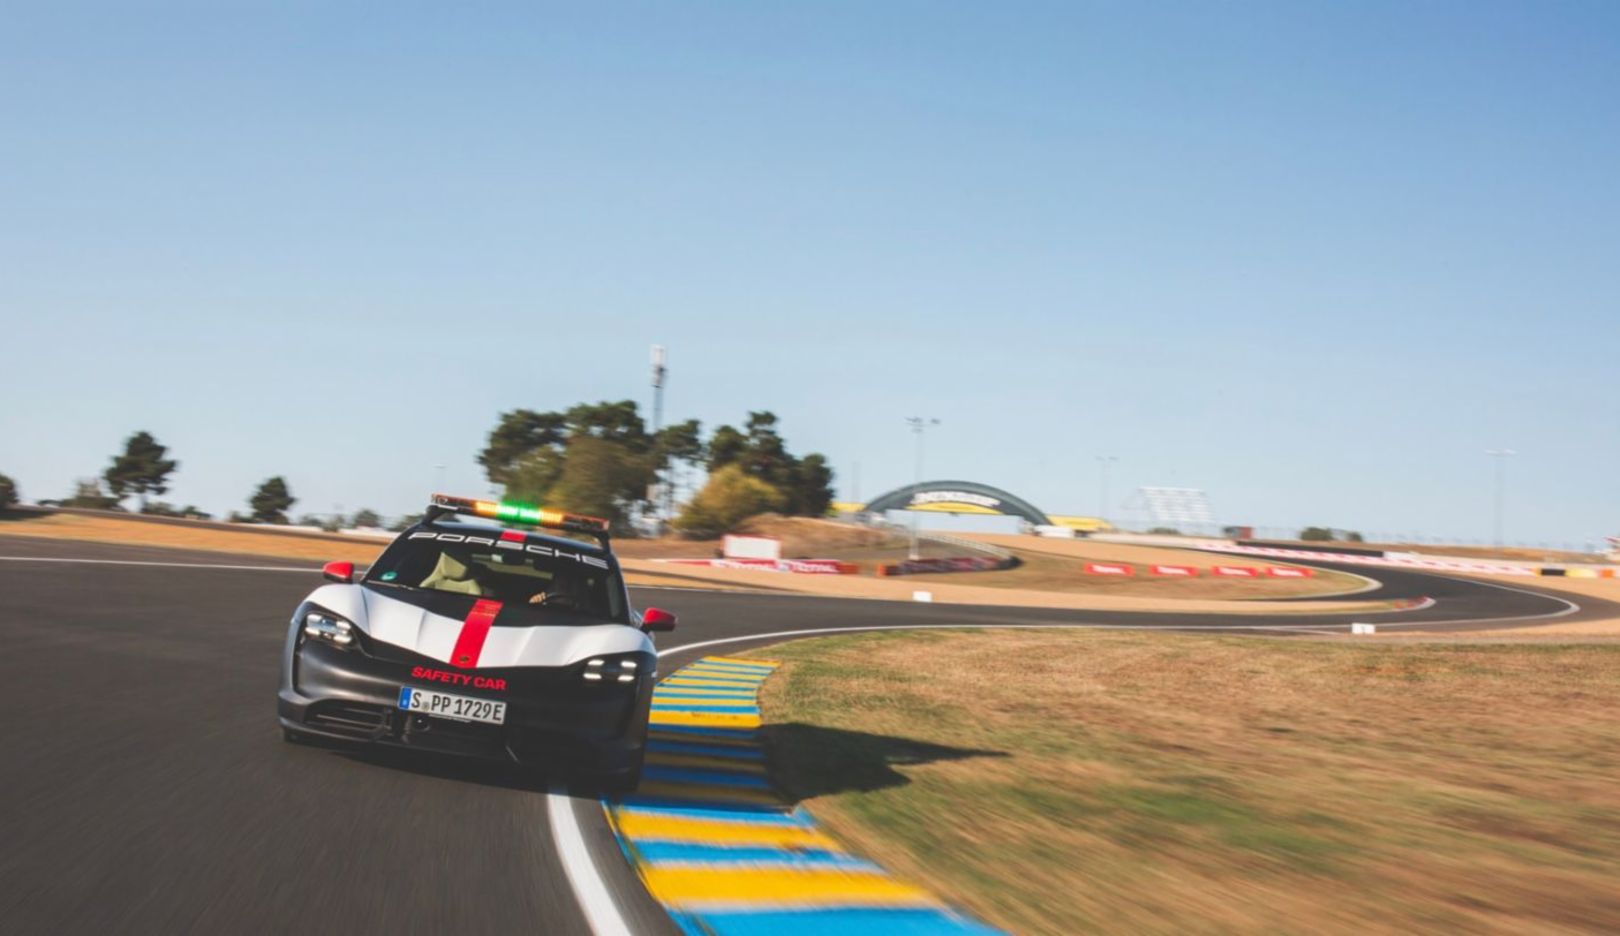 Finally: arrival in Le Mans, Porsche’s second home. The Porsche Taycan Turbo has traveled more than 800 kilometers.